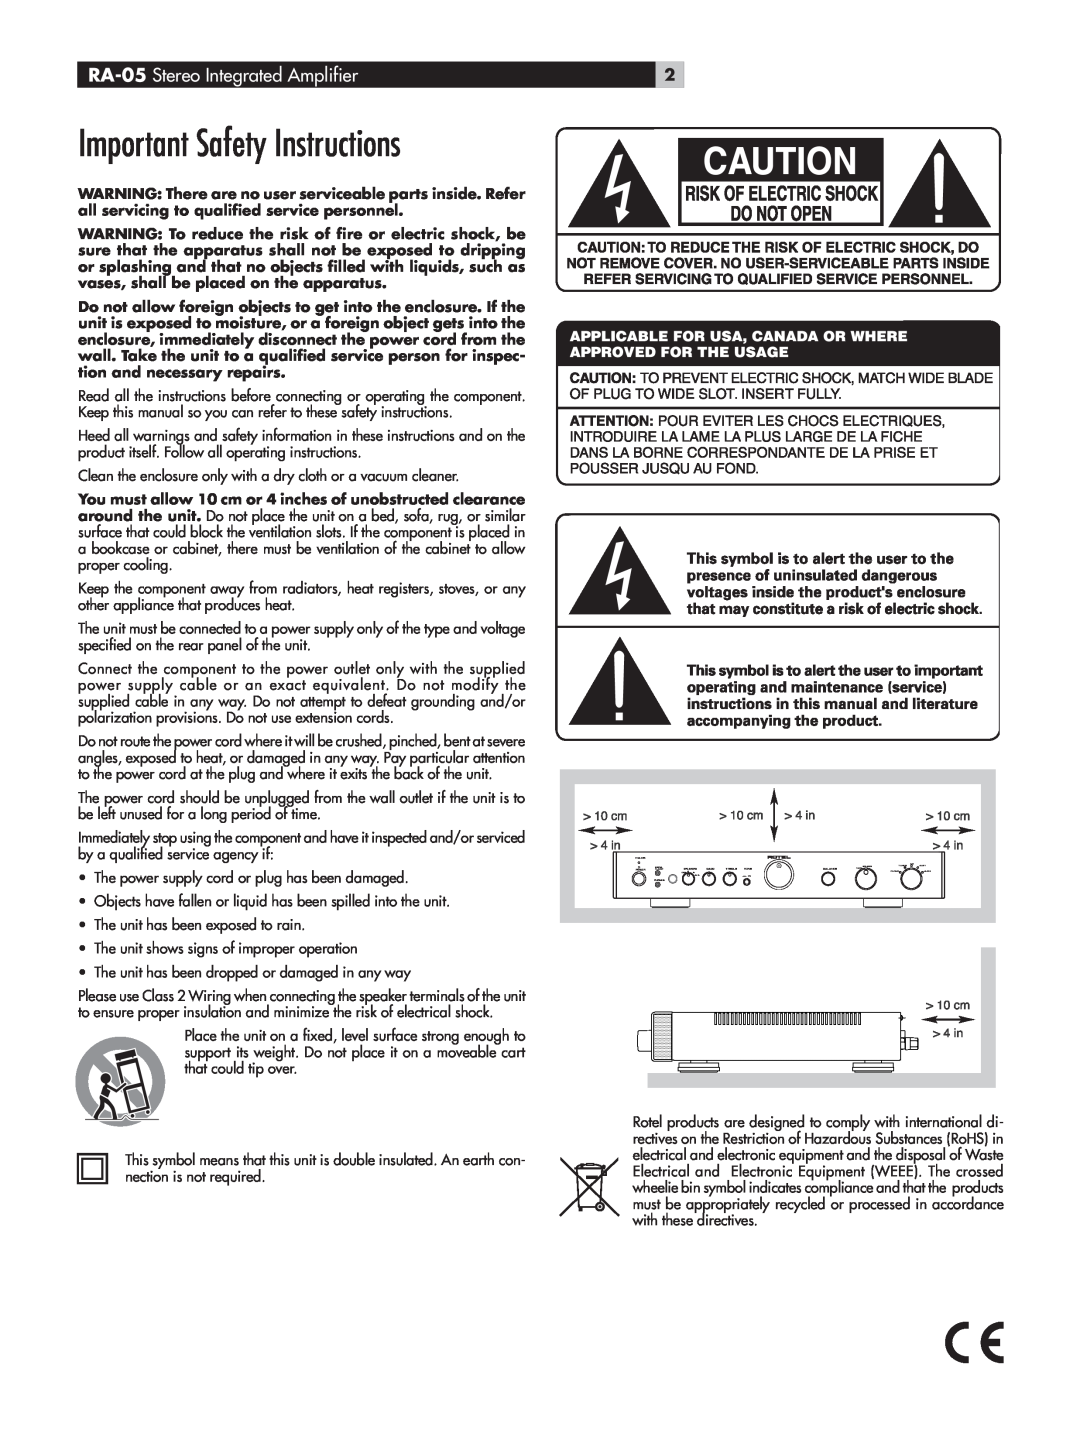 Rotel owner manual Important Safety Instructions, RA-05 Stereo Integrated Amplifier 